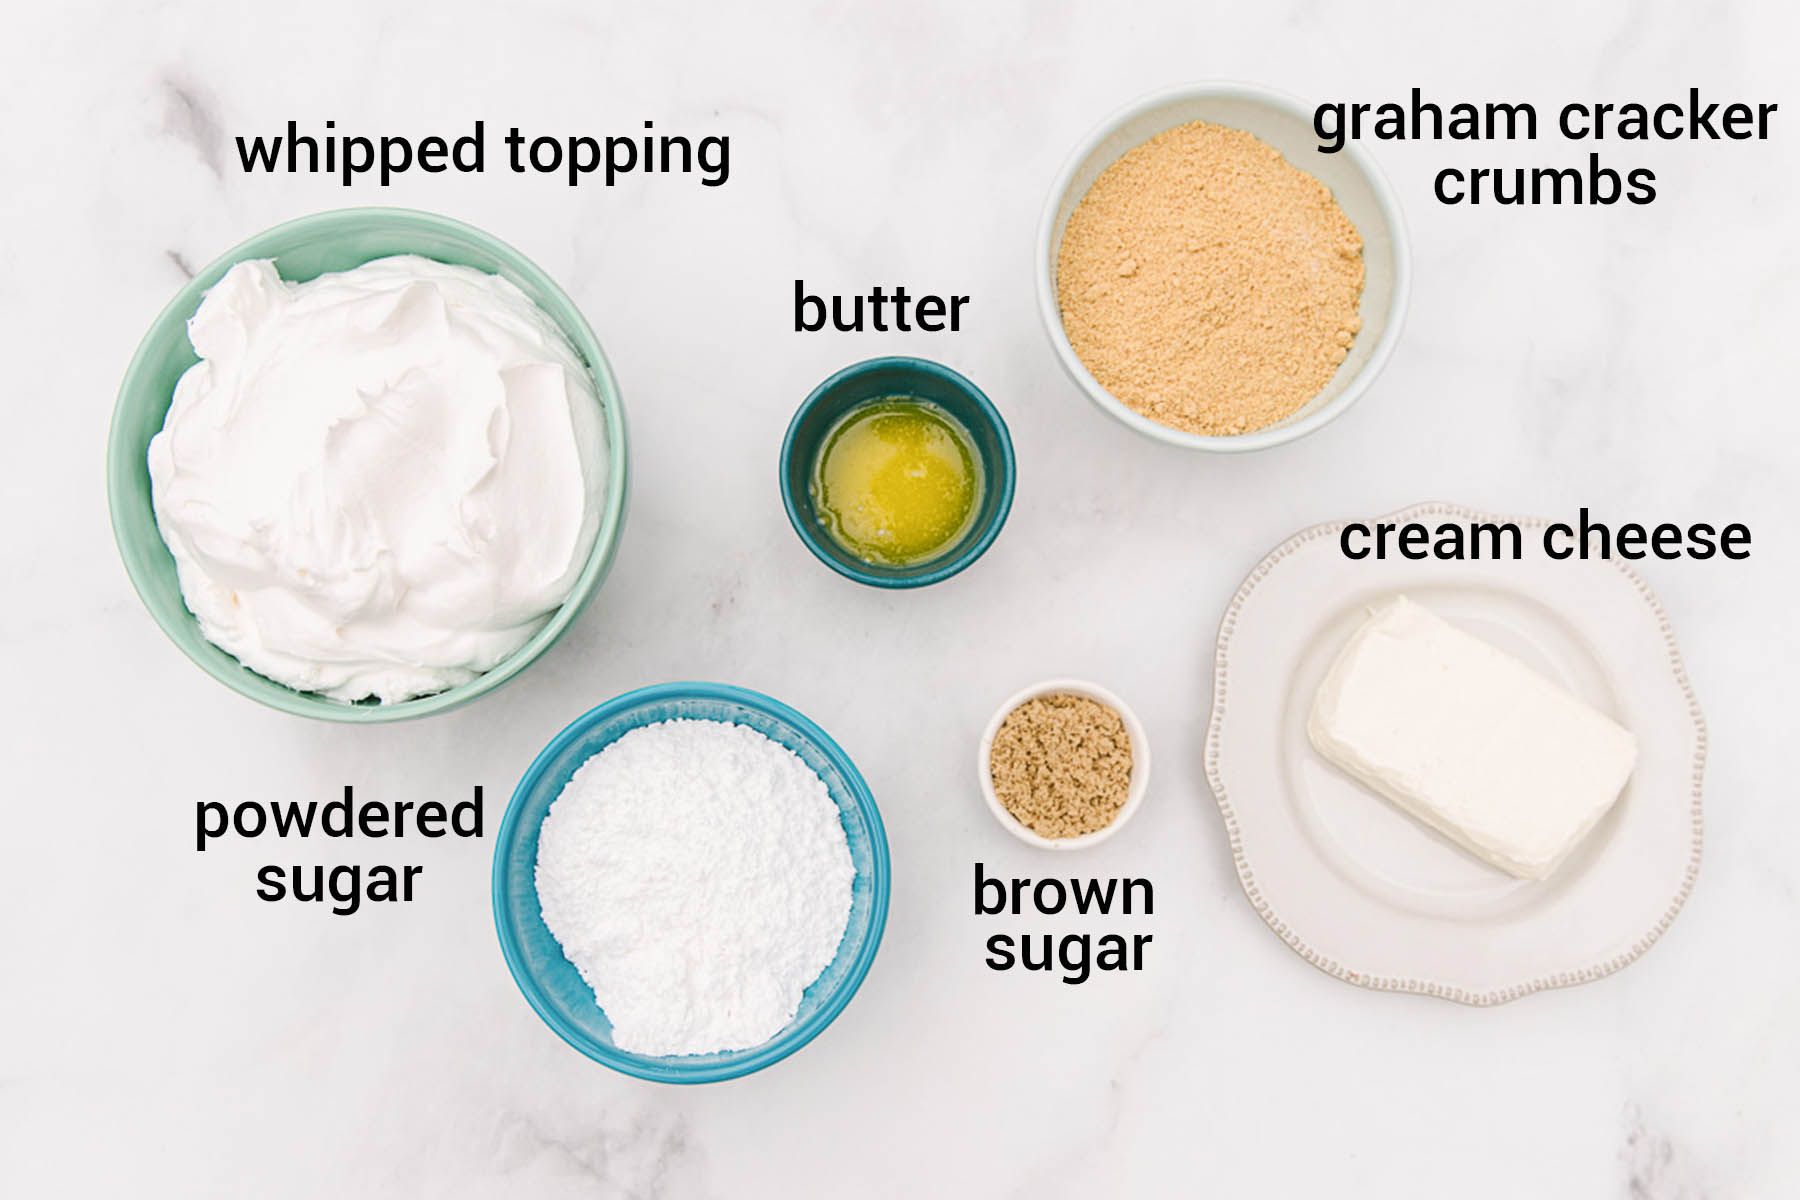 A white marble counter top with small bowls full of whipped topping, powdered sugar, brown sugar, butter, graham crackers, and a plate with cream cheese on it.